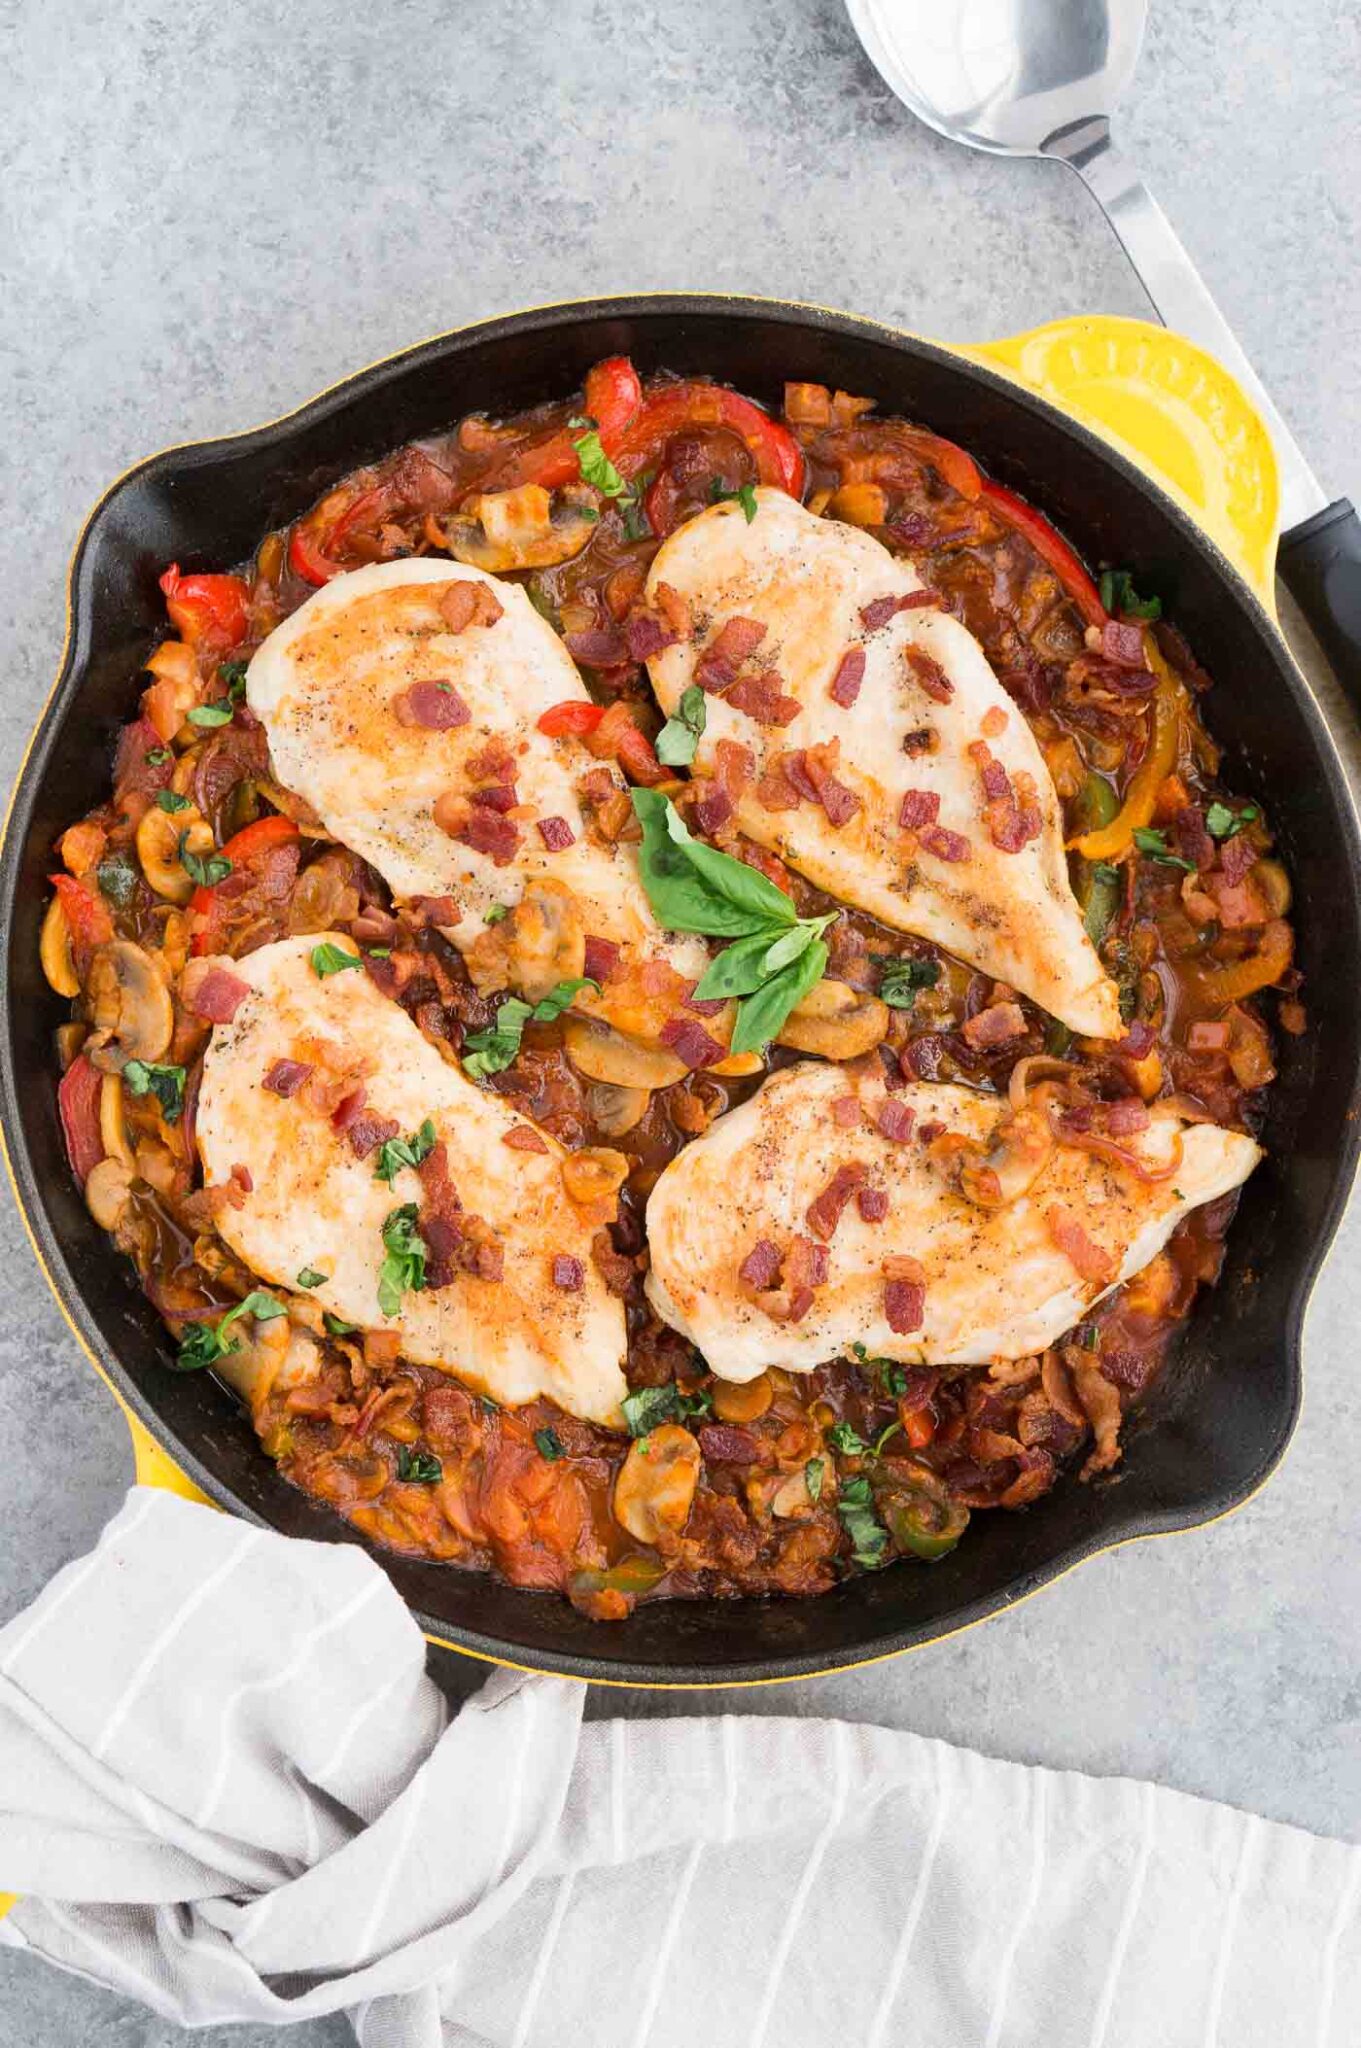 chicken and bacon added on top of cooked vegetables in a skillet